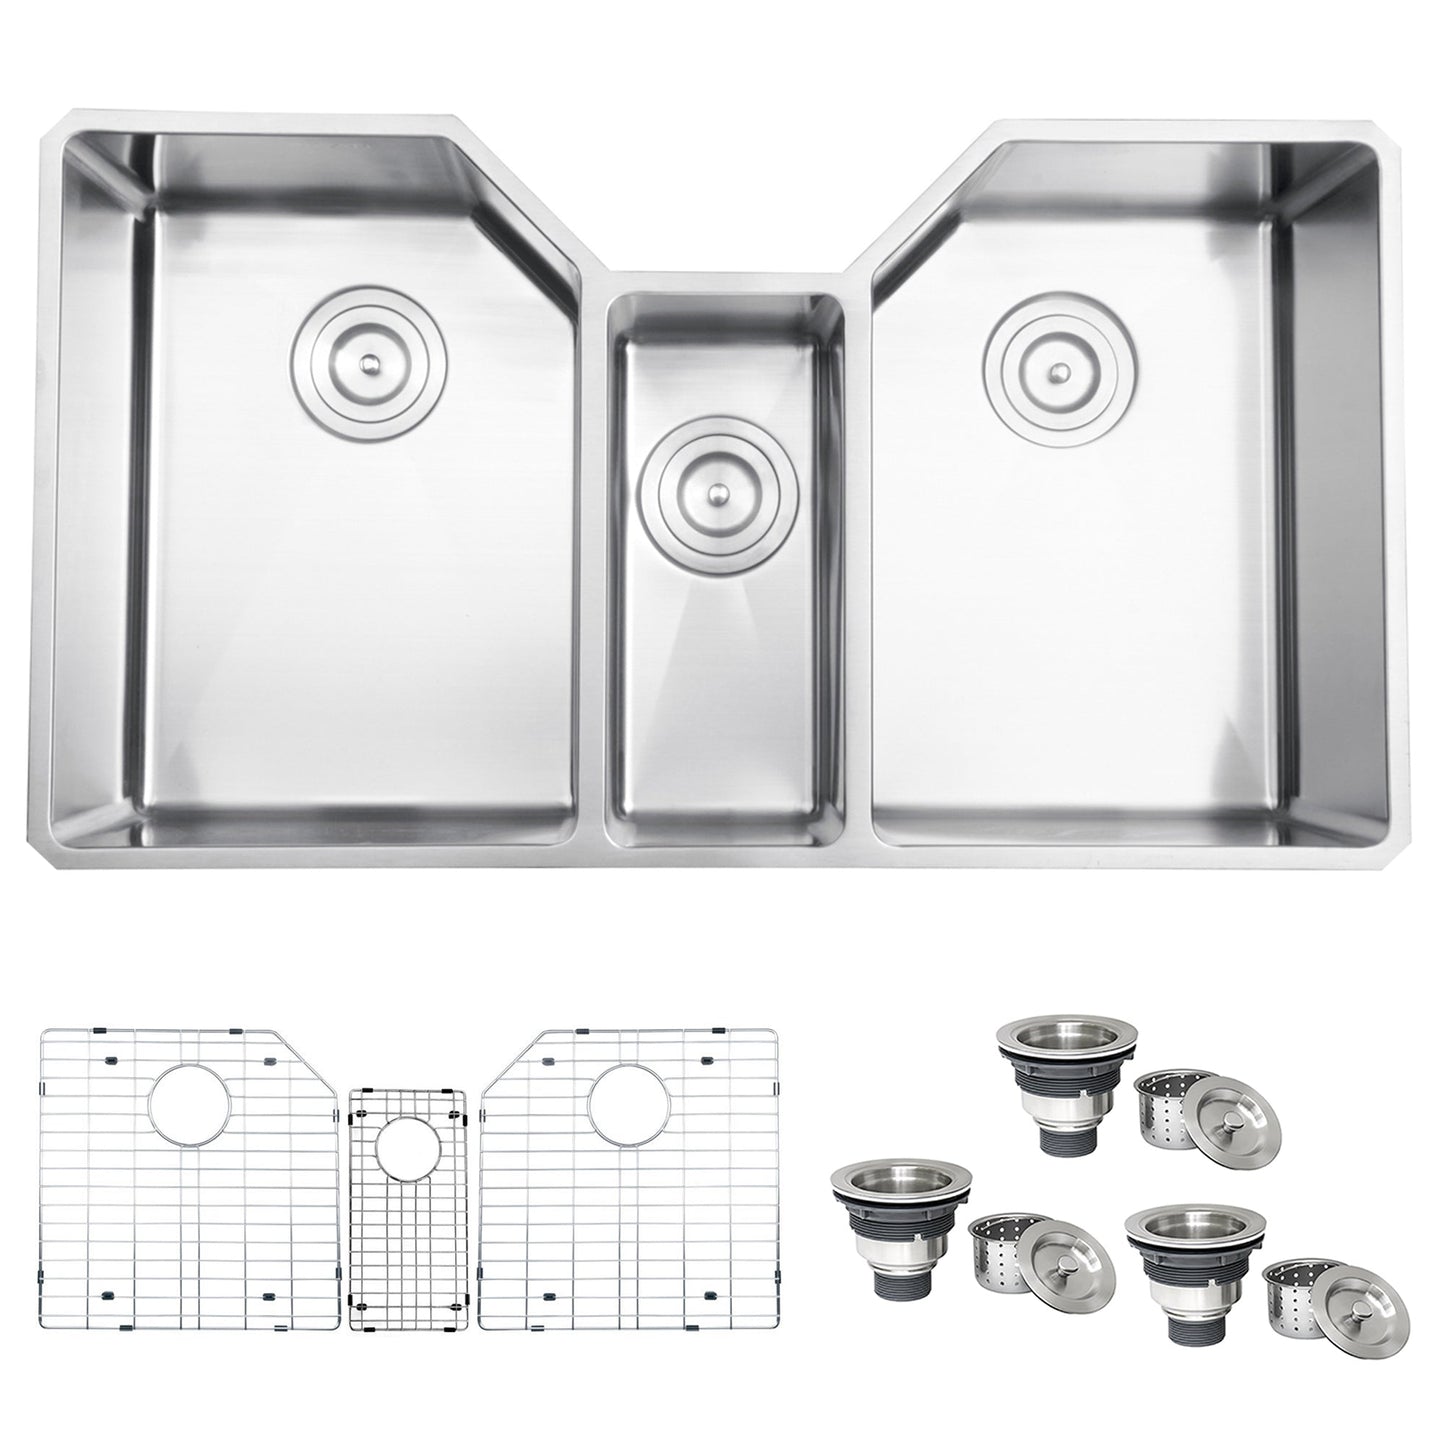 Ruvati Gravena 35" x 20" Undermount Stainless Steel Triple Bowl Kitchen Sink With Basket Strainer, Bottom Rinse Grid and Drain Assembly